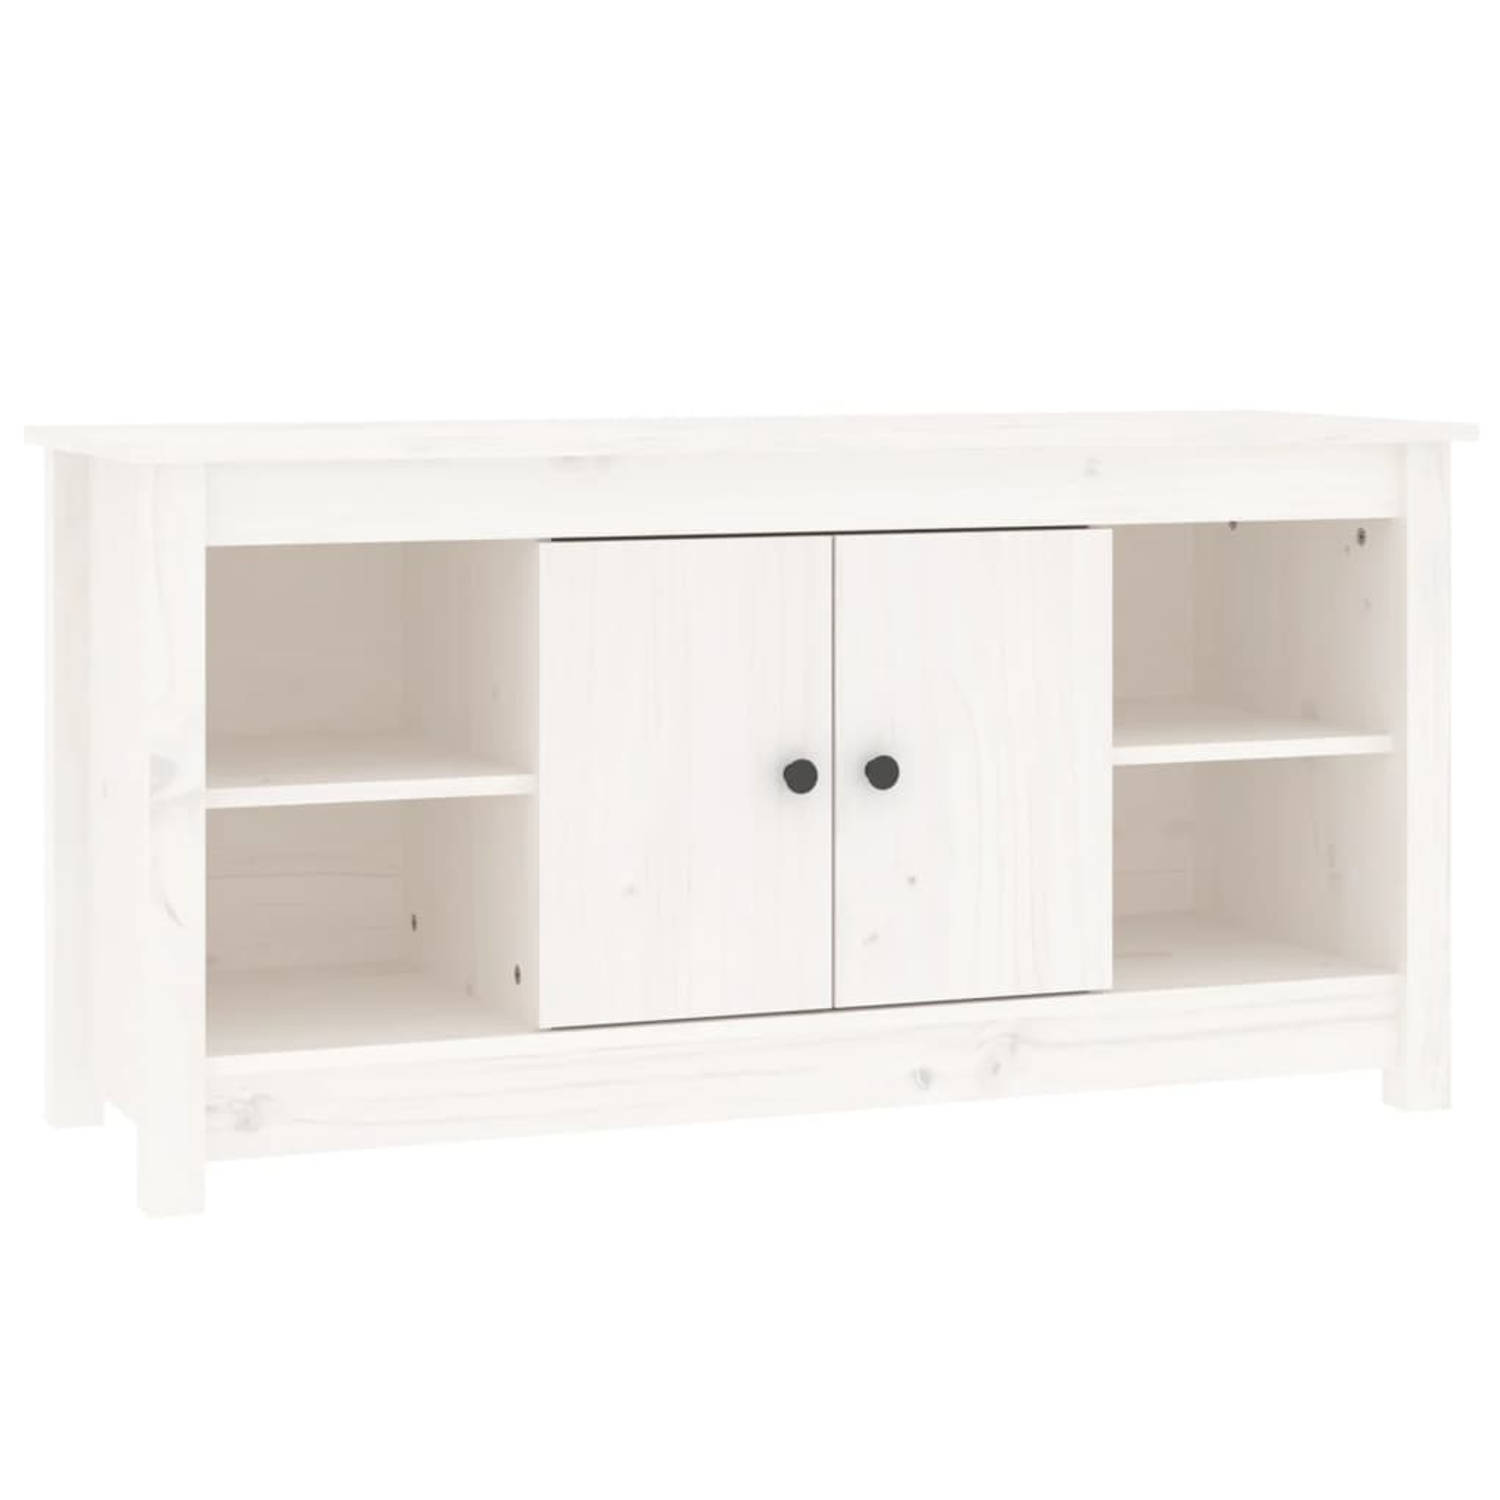 The Living Store TV-kast Grenenhout 103 x 36.5 x 52 cm Wit